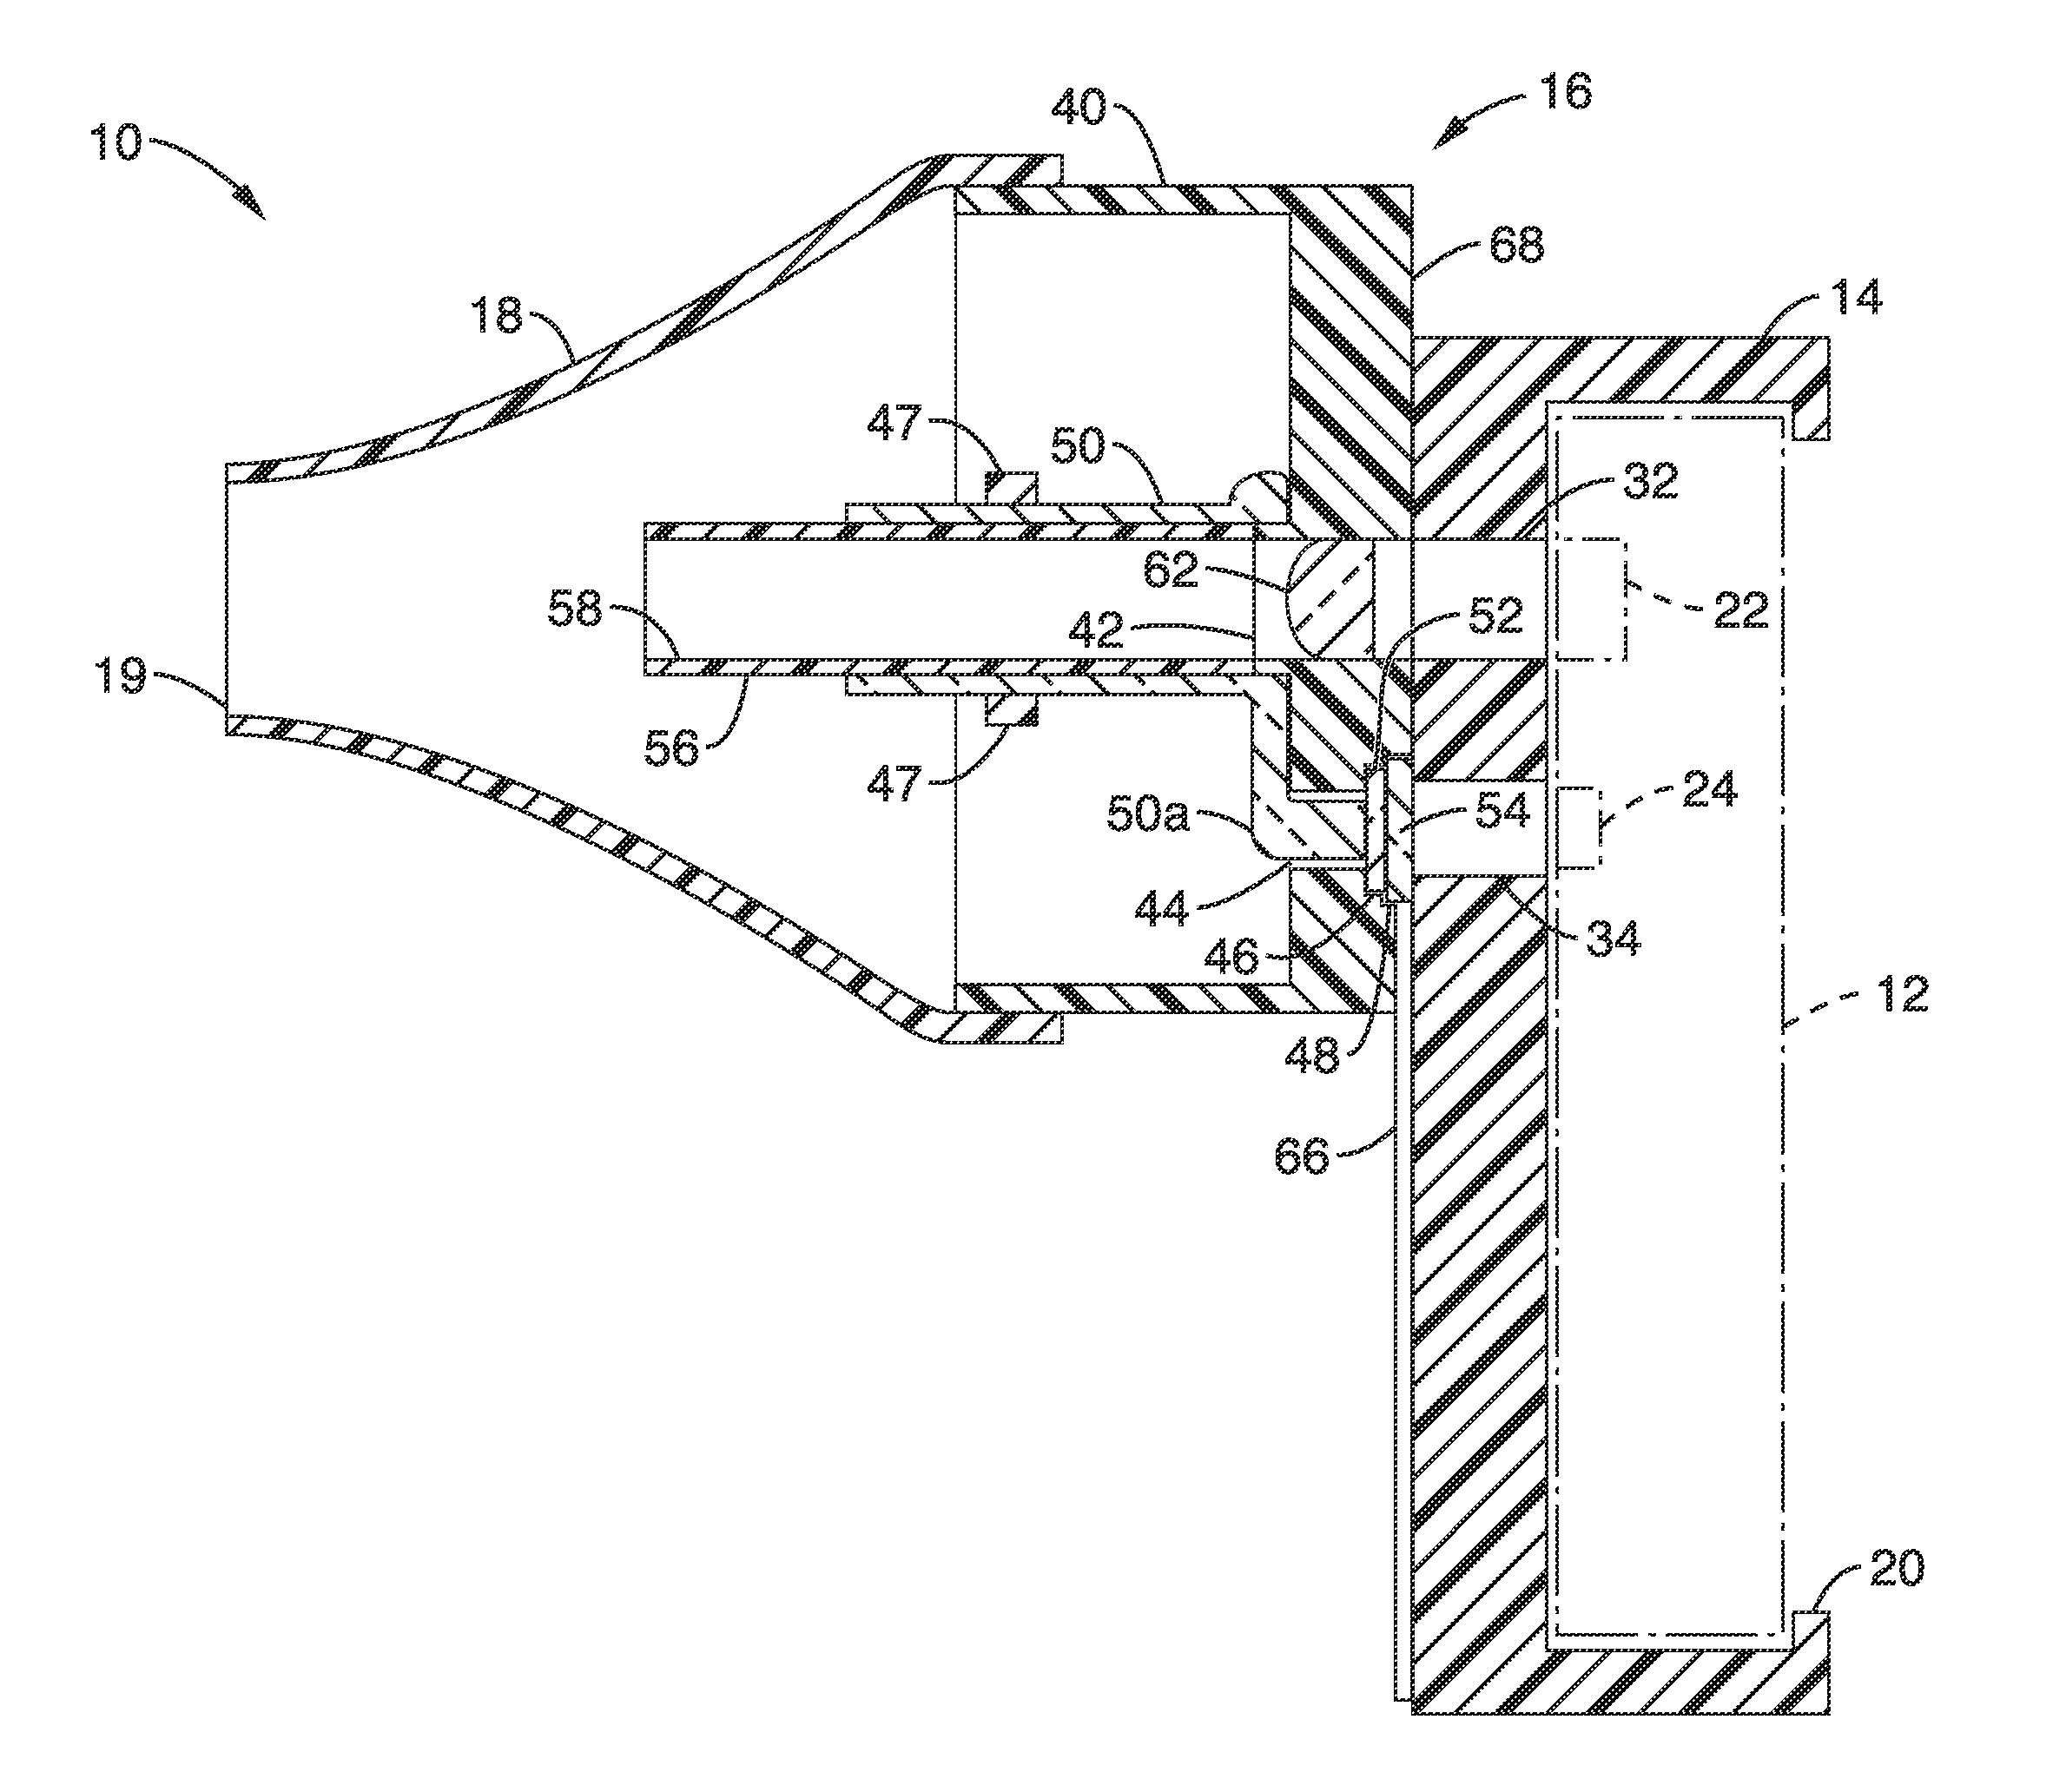 Cellscope apparatus and methods for imaging